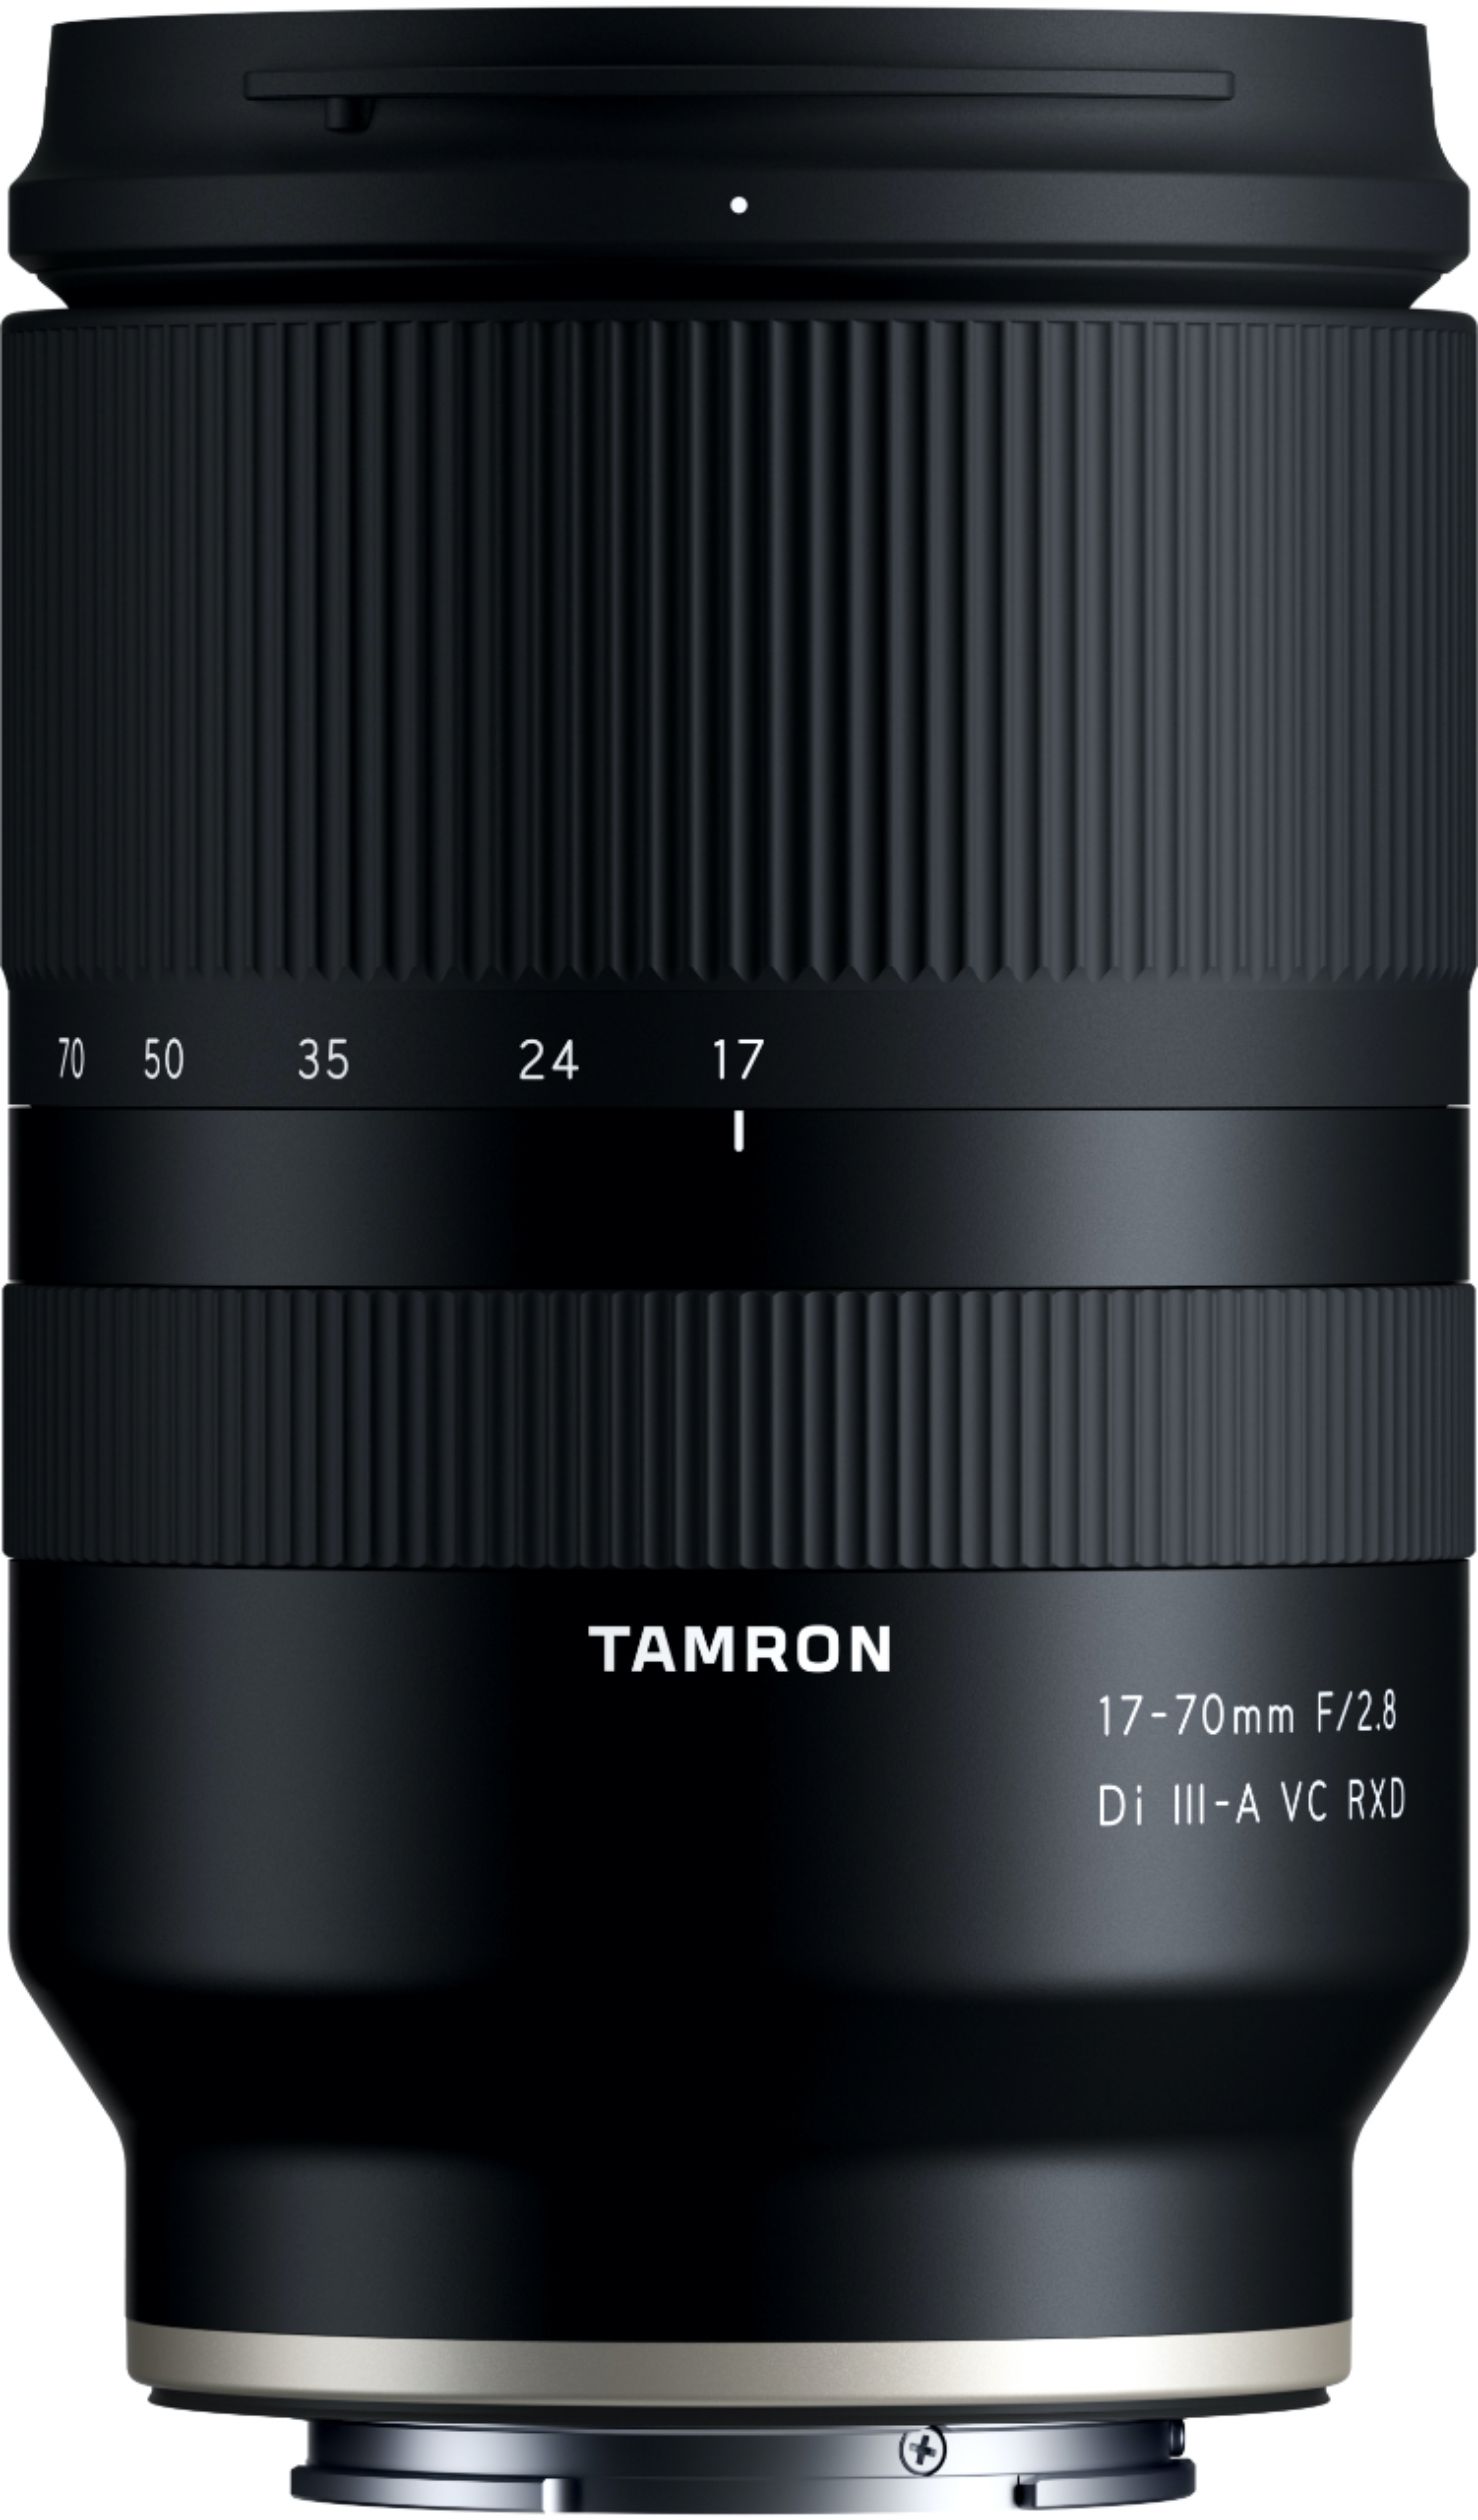 Tamron 17-70mm F/2.8 Di III-A VC RXD Standard Zoom Lens for Sony E